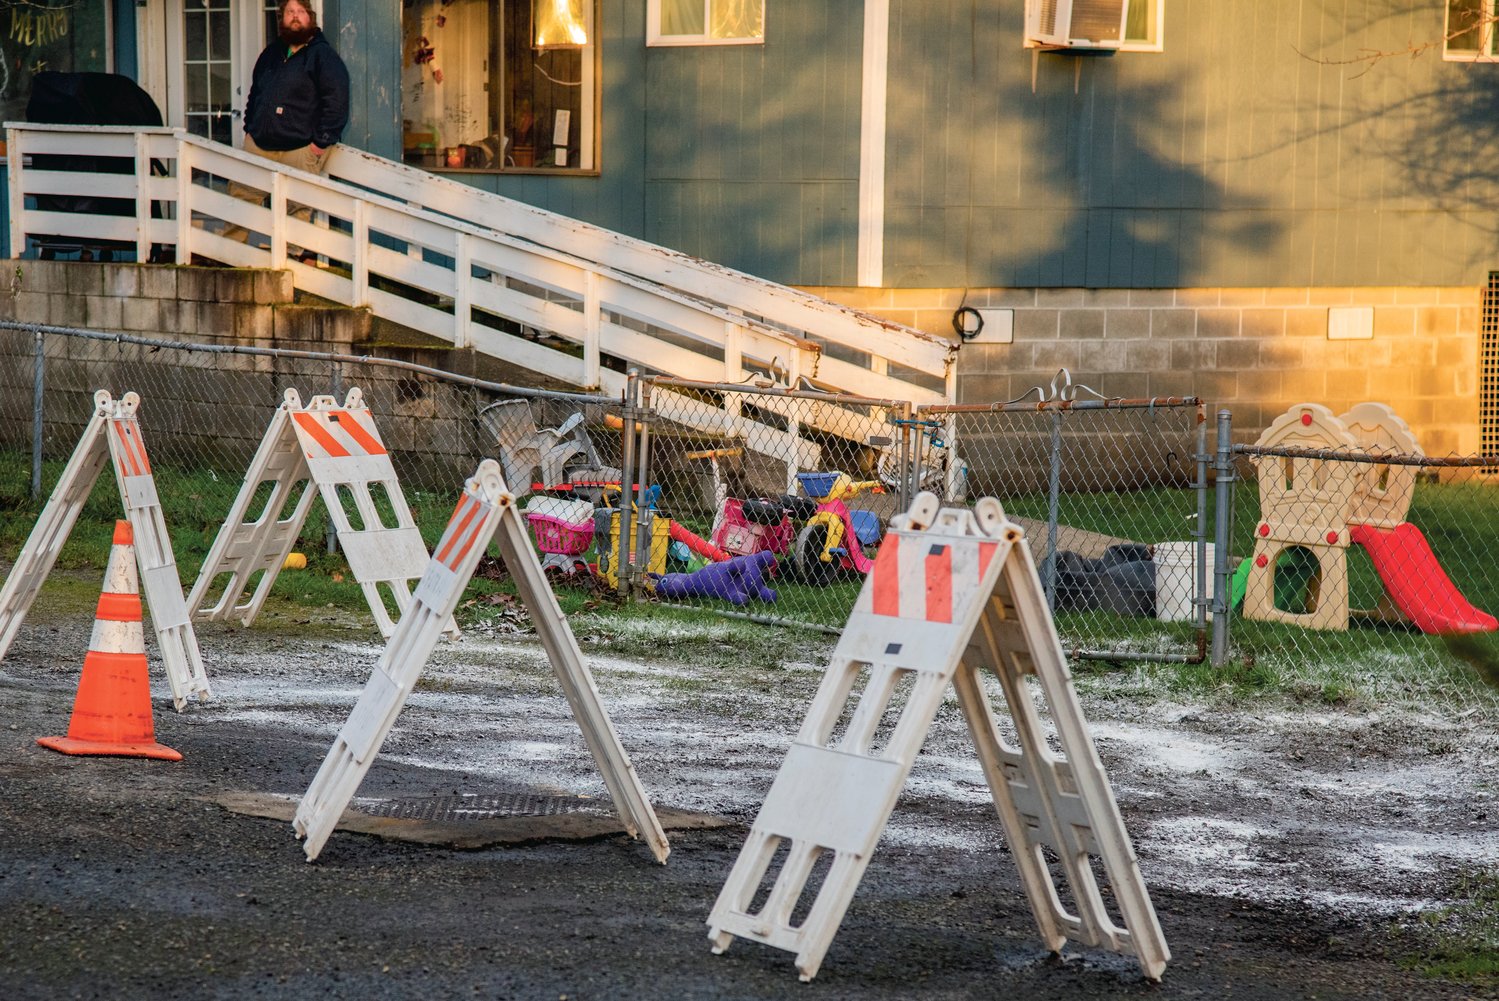 Seth Richards, 35, looks on from his porch where traffic cones and signs mark the area that flooded spilling into the yard he rents where his kids play.